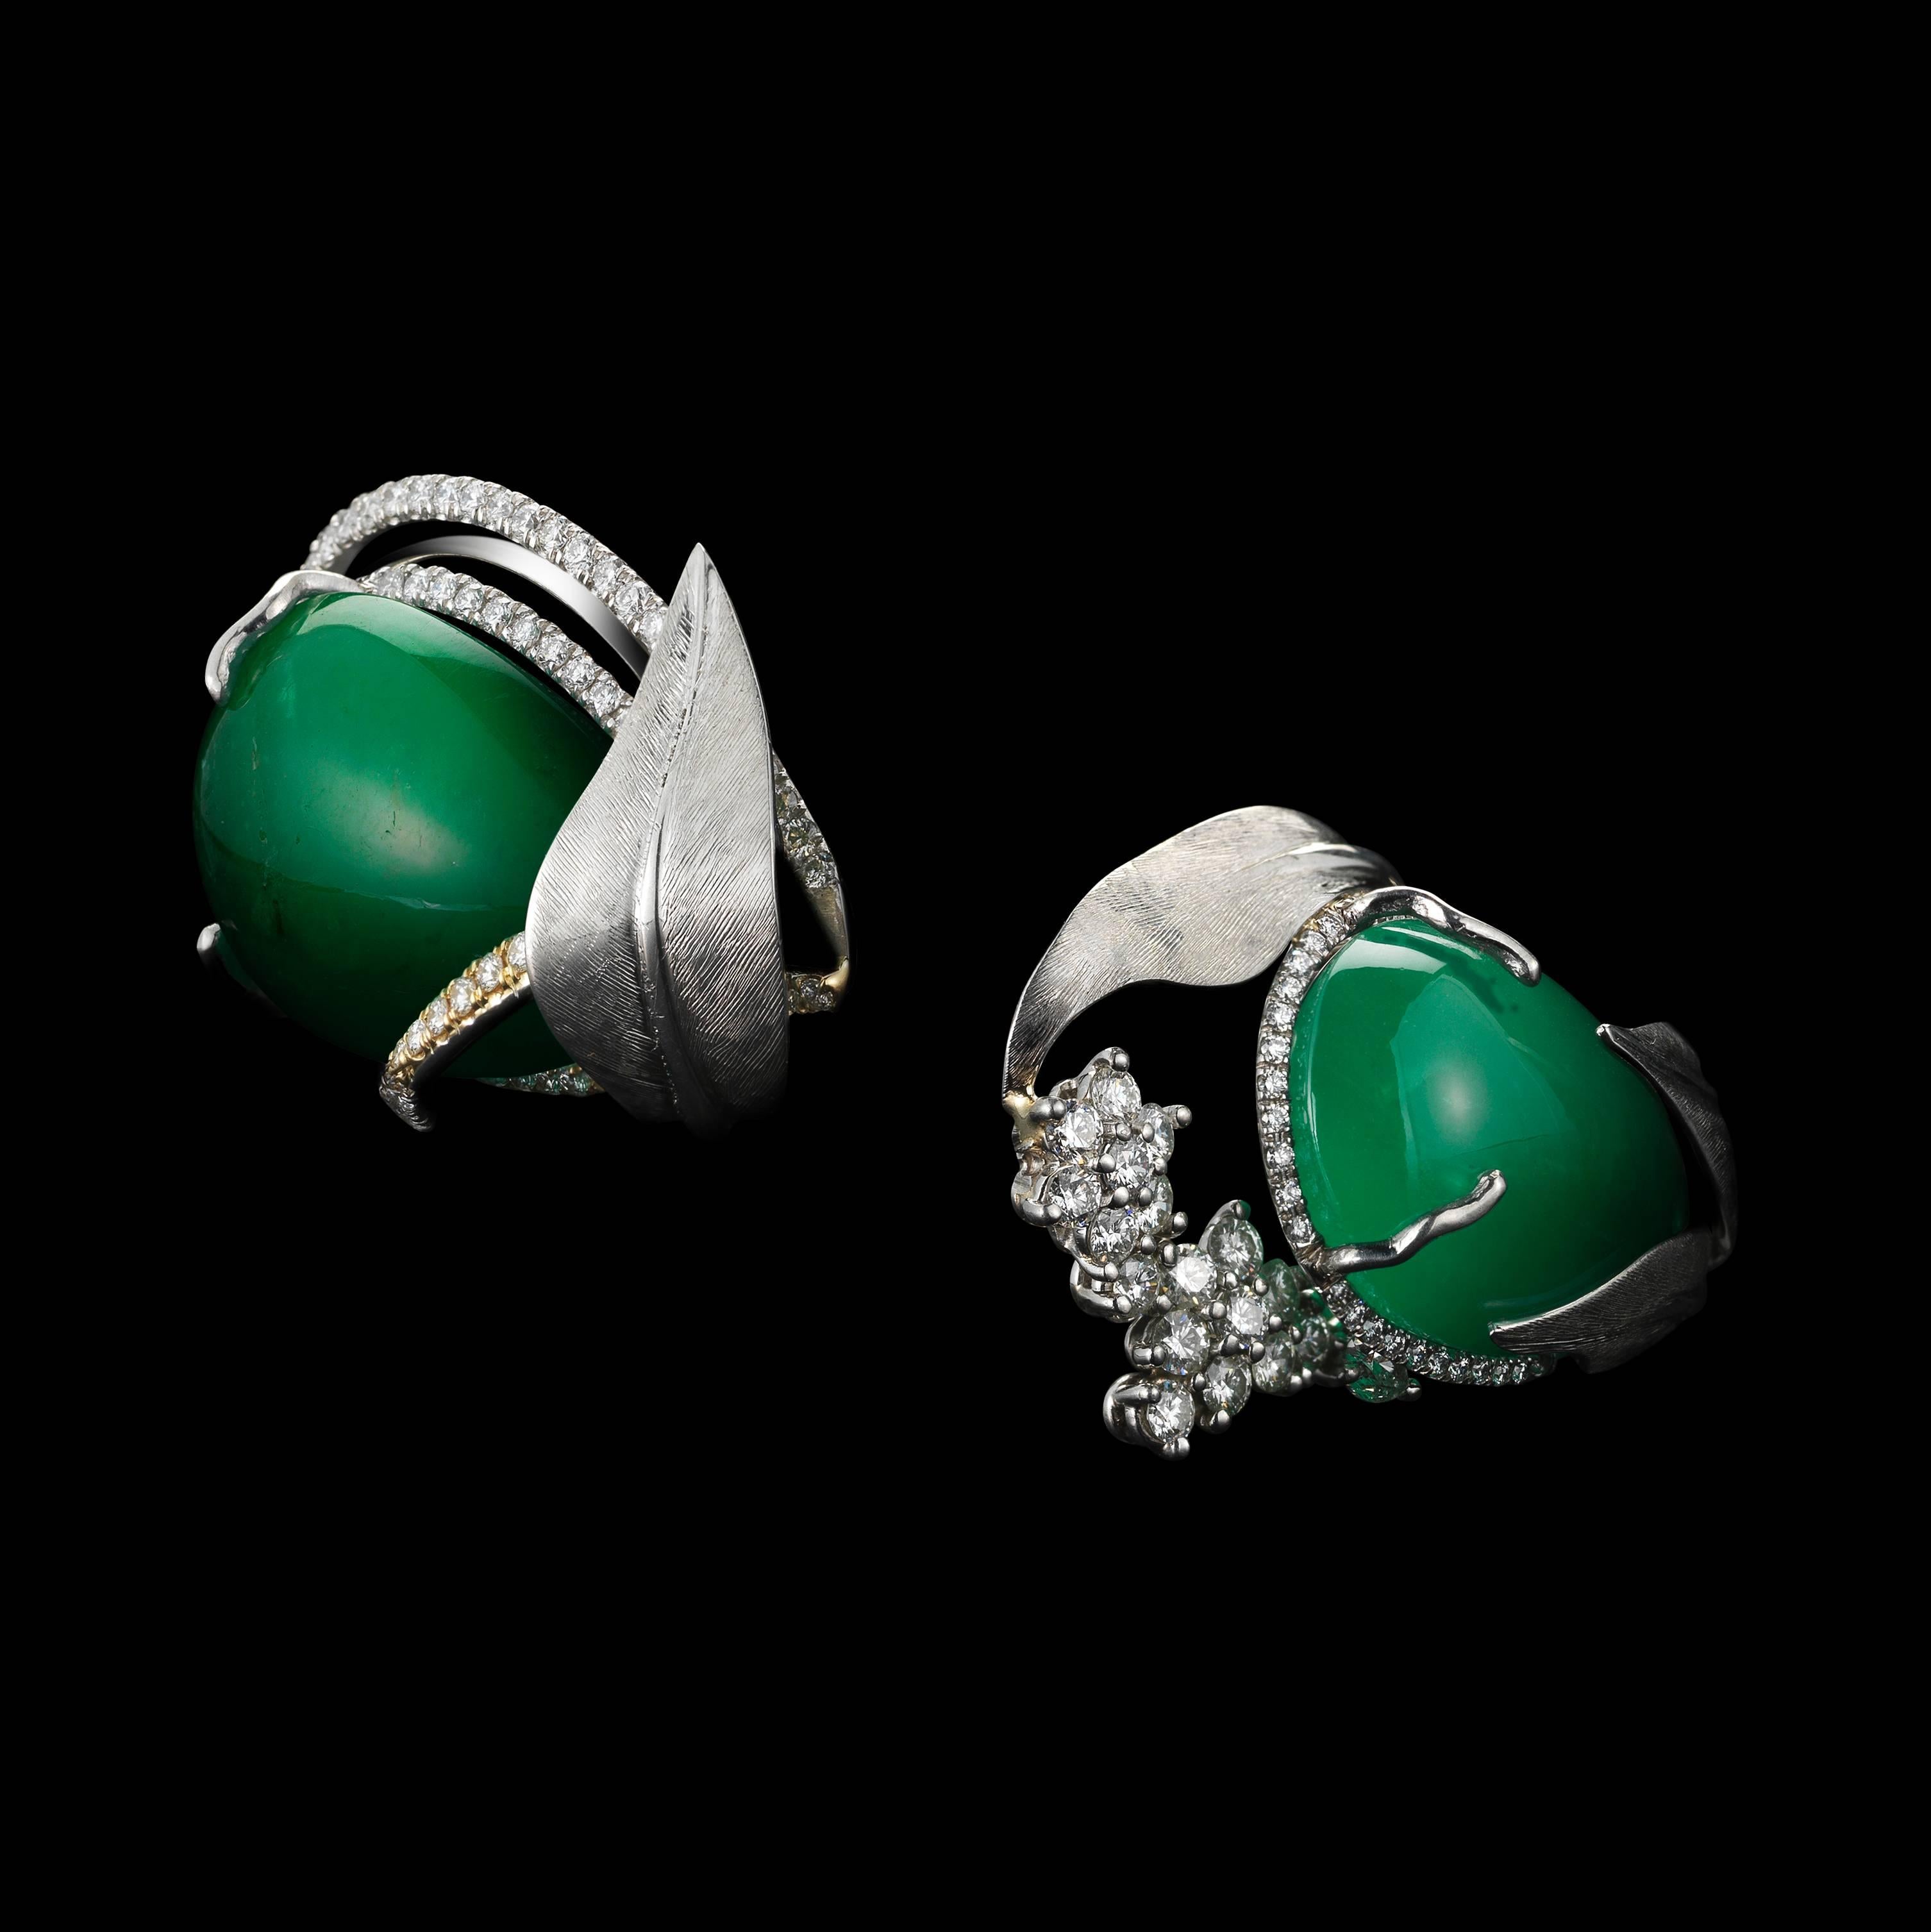 Dramatic, one-of-a-kind Alexandra Mor cuff earrings featuring matching Drop-shaped natural green Emeralds weighing 52.58 Cts. , encircled by Alexandra Mor's signature details of 1mm floating Diamond melee , and knife-edged wire. Earrings are further